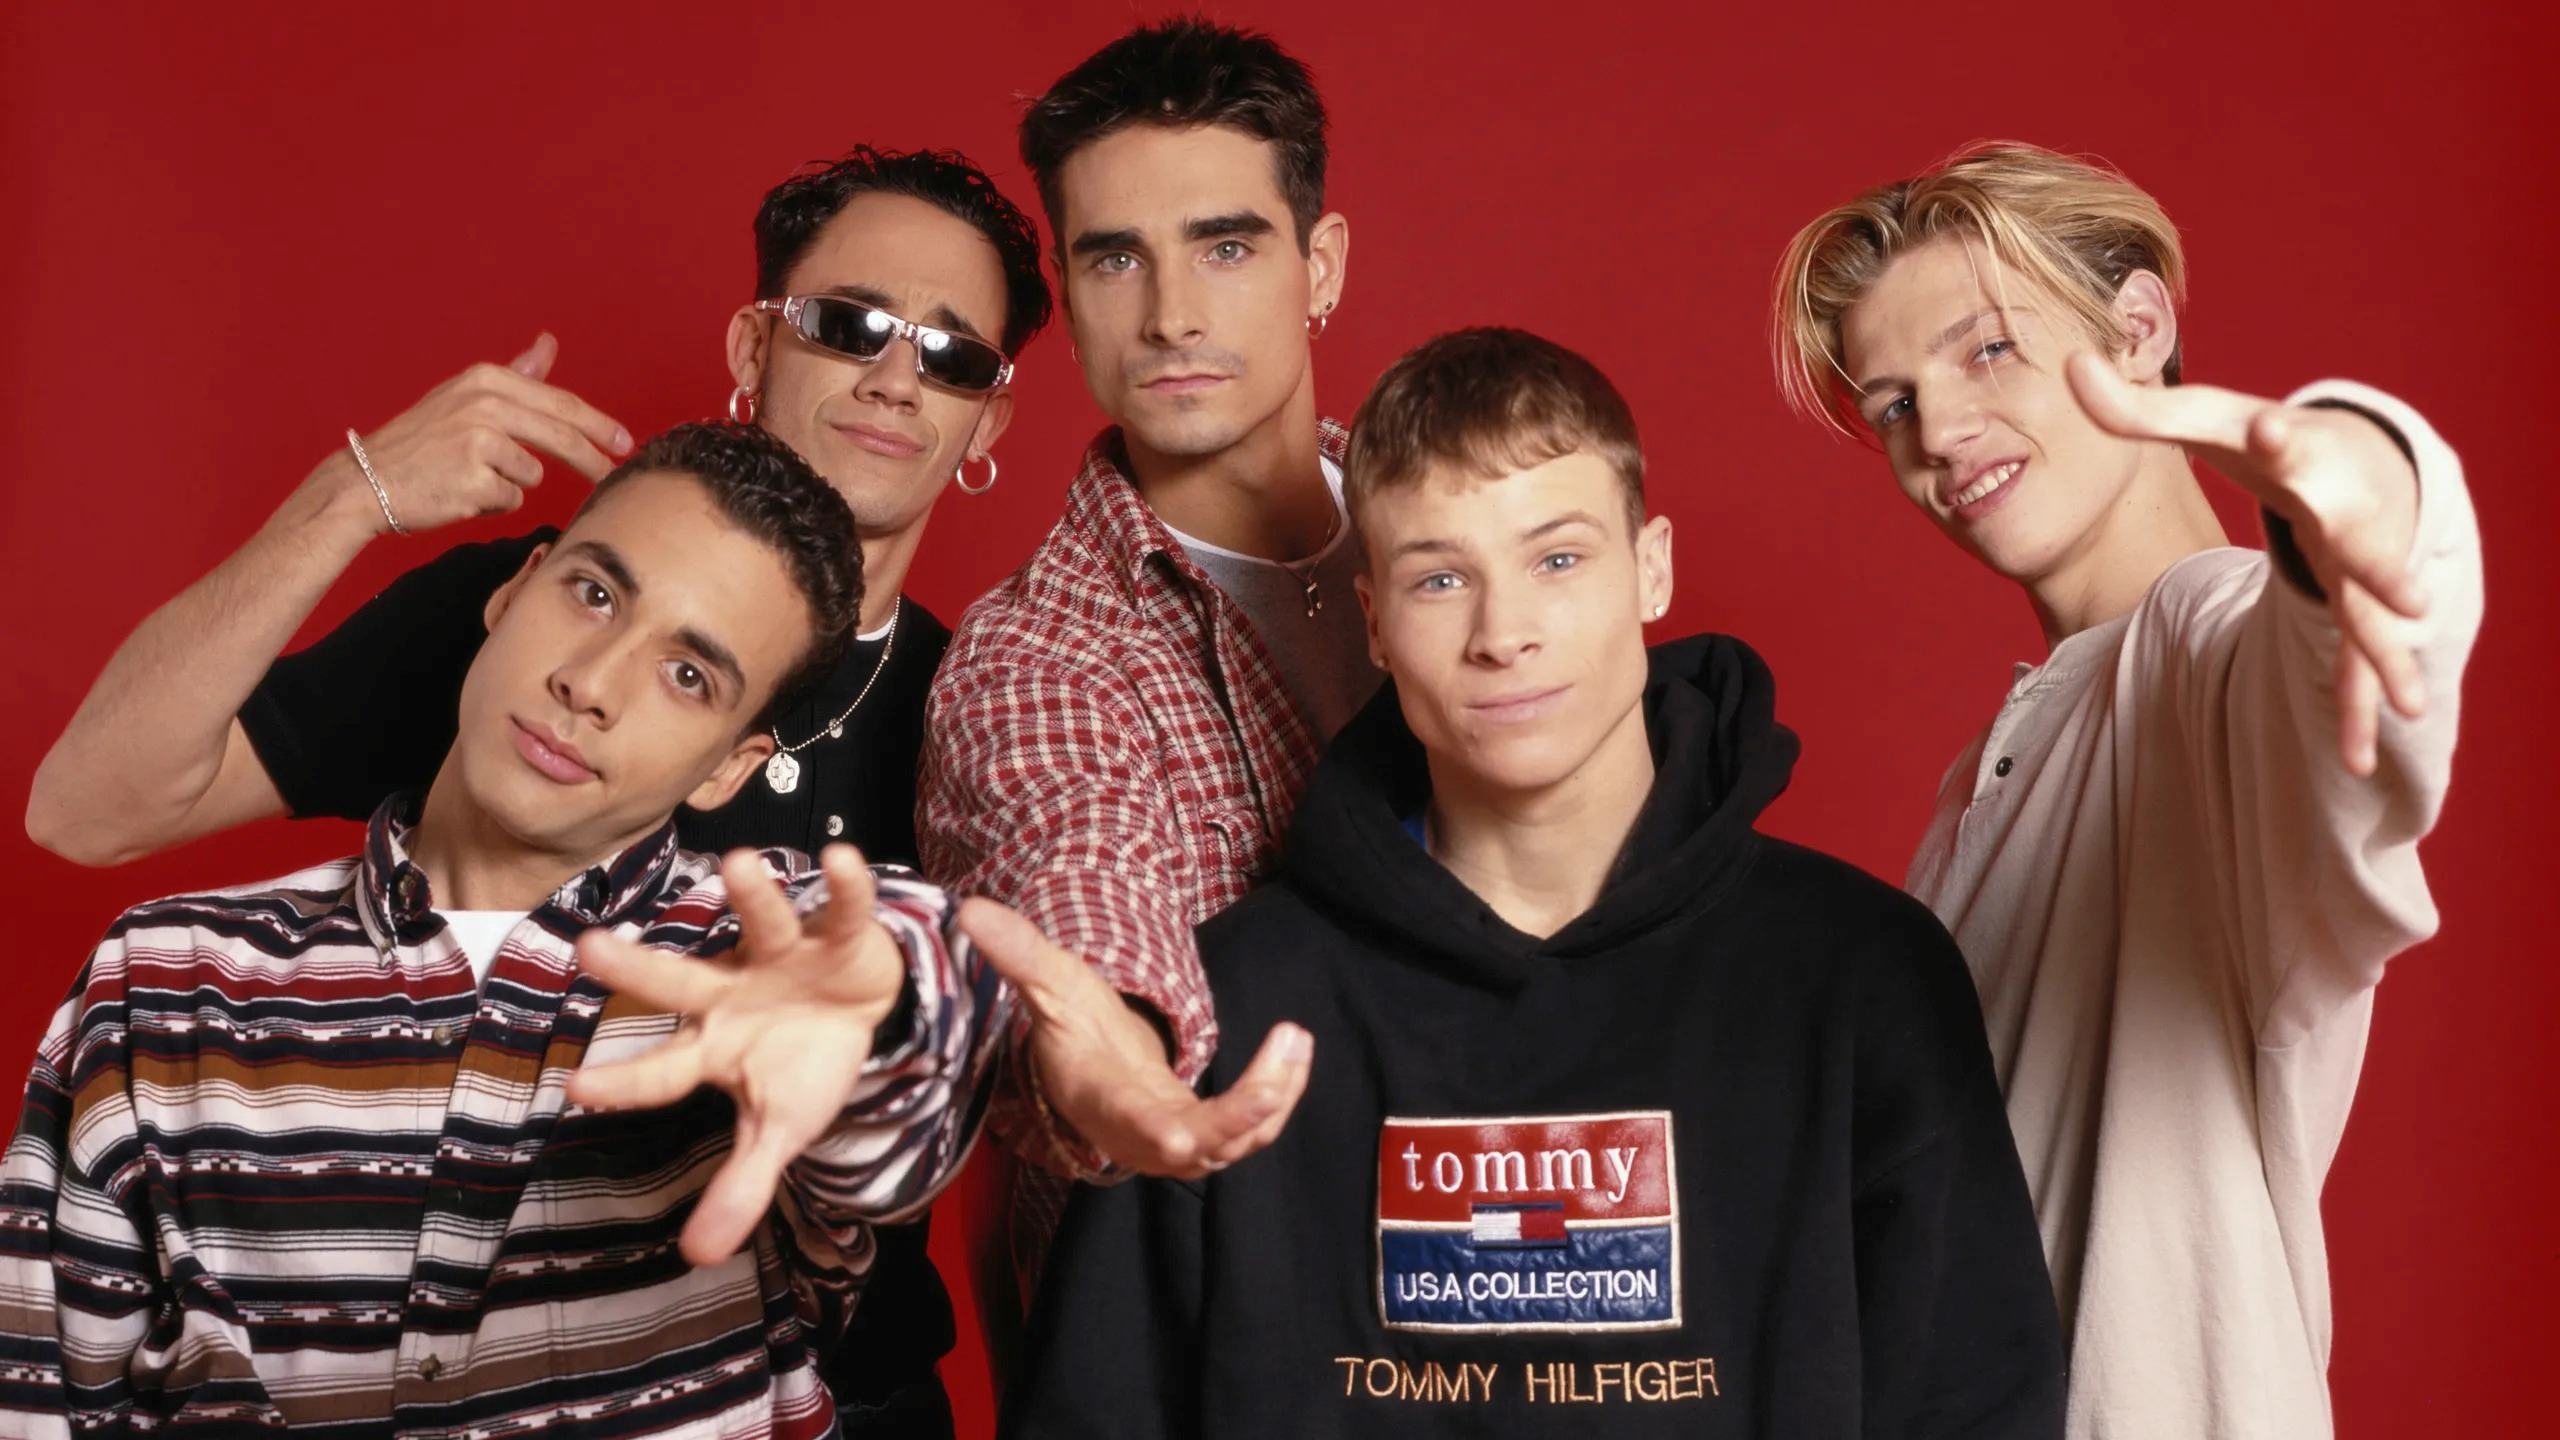 21-extraordinary-facts-about-the-backstreet-boys